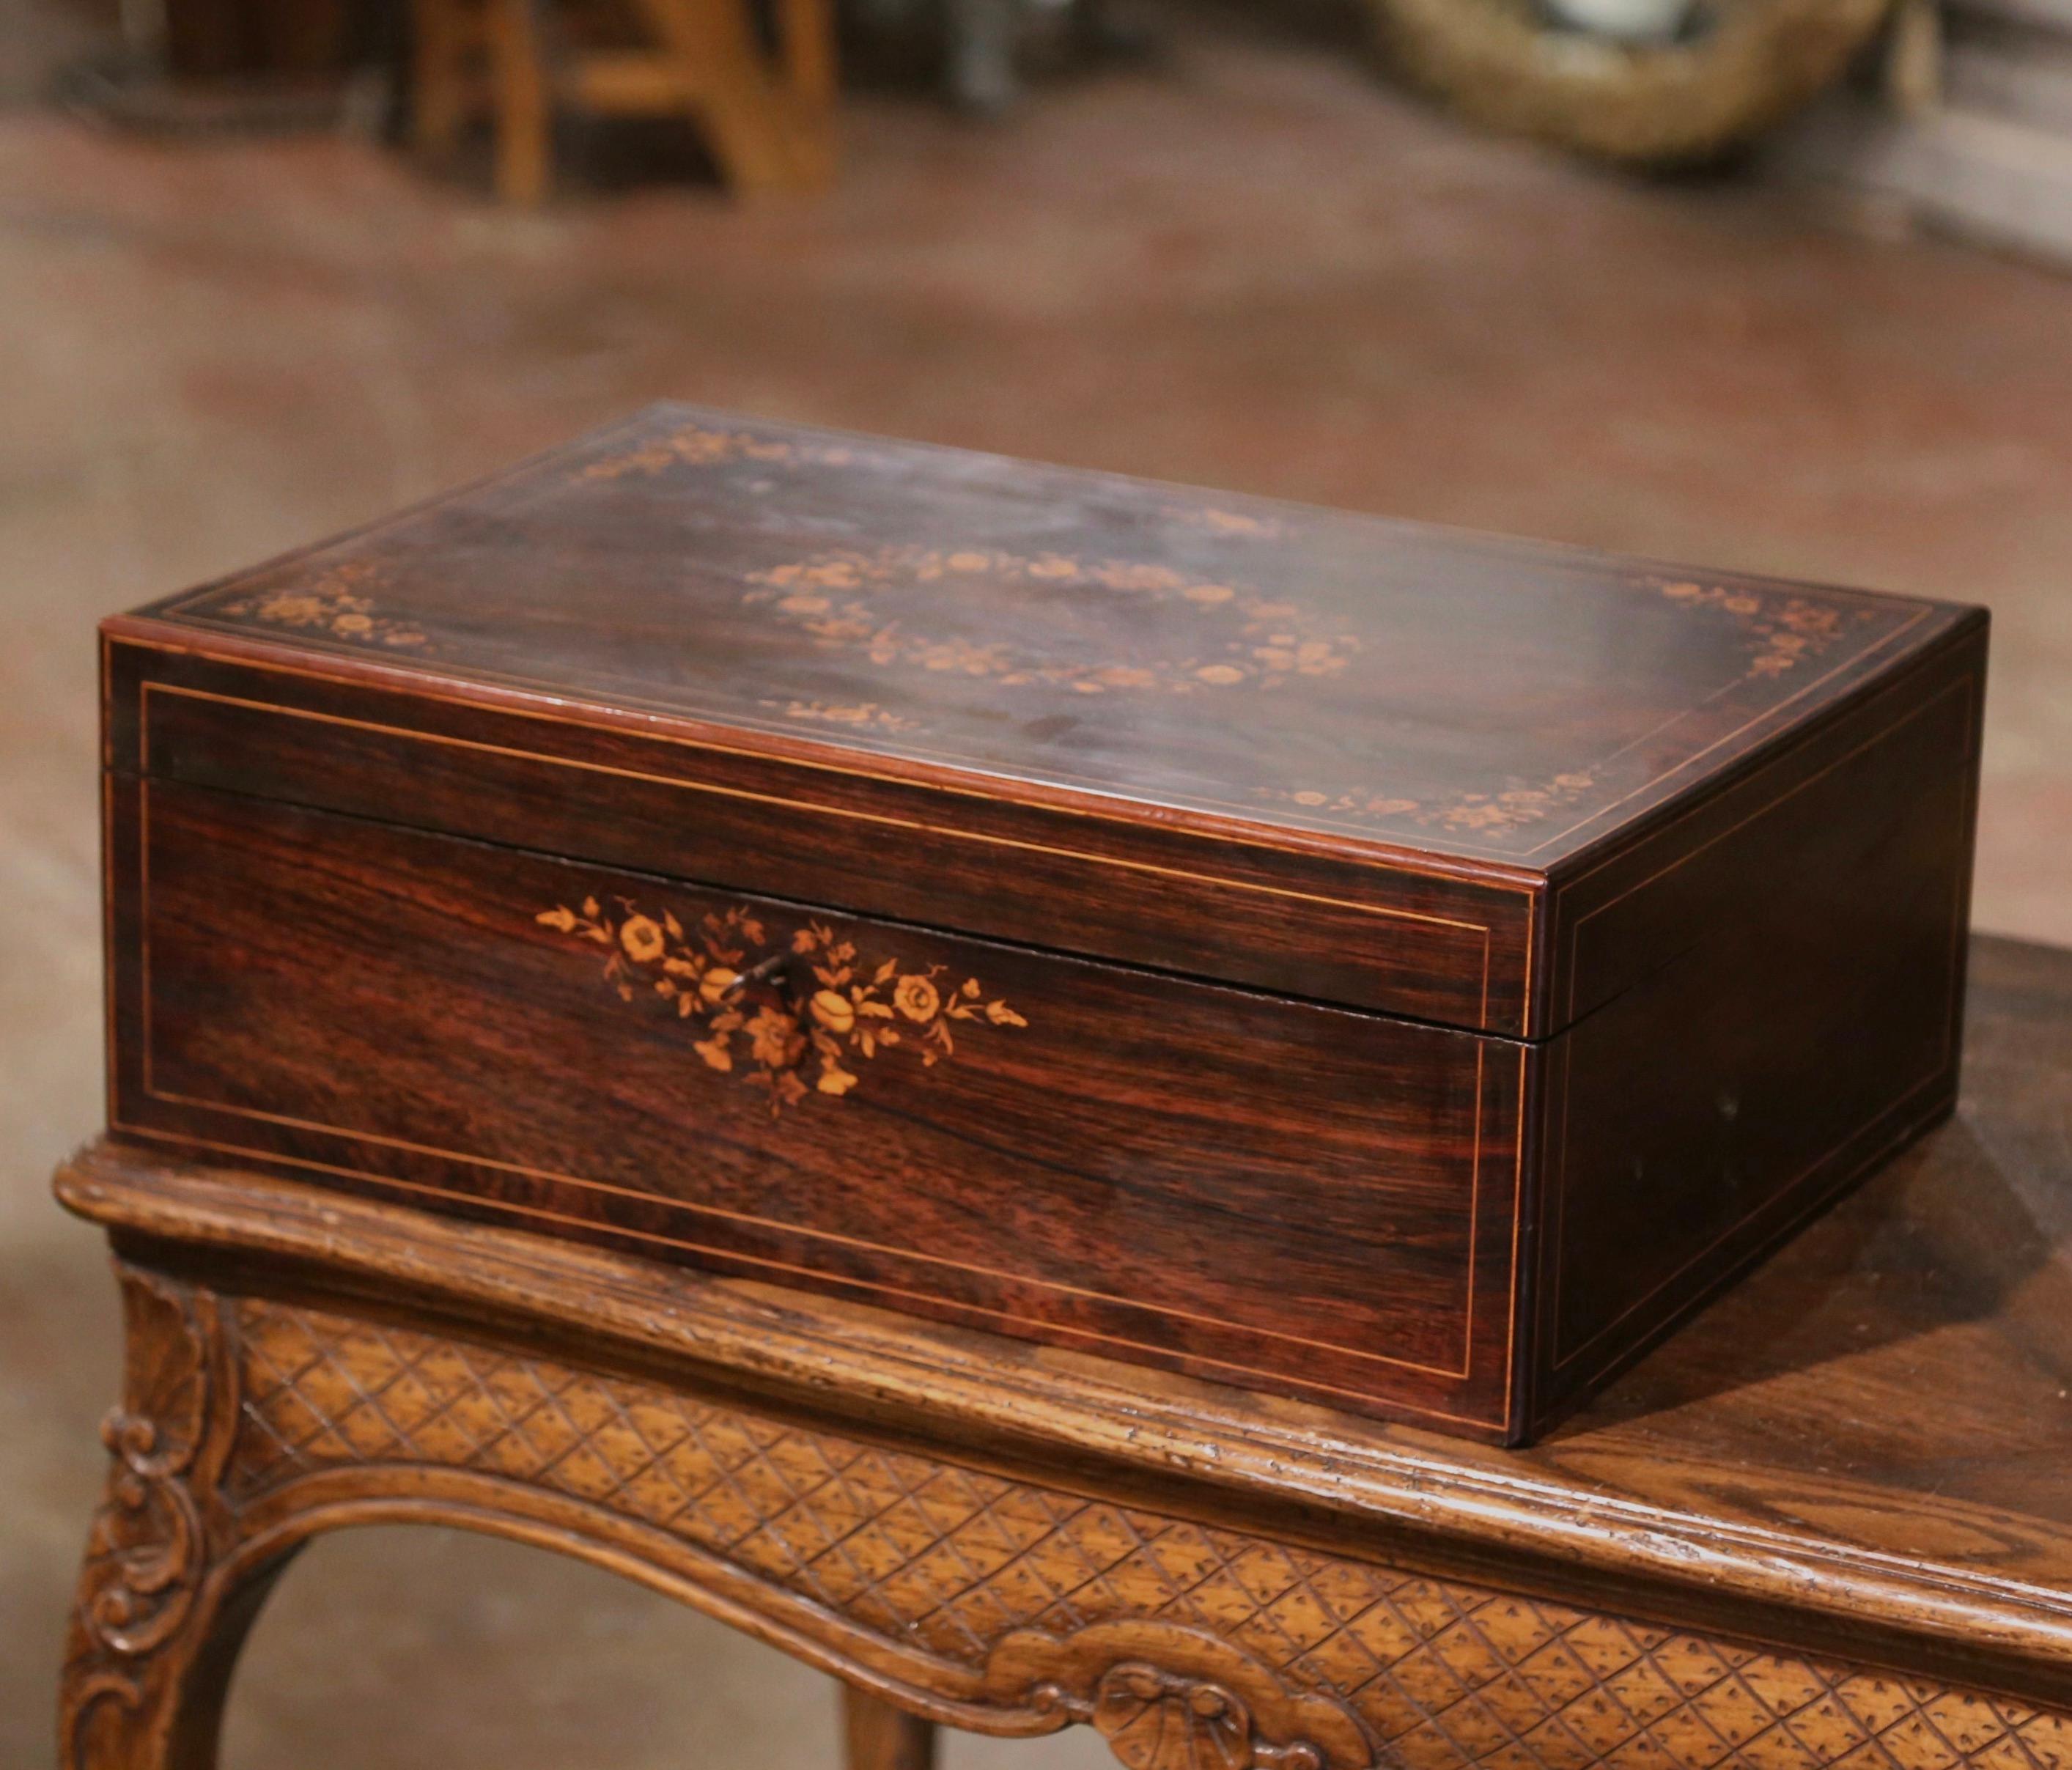 19th Century French Napoleon III Floral Inlaid Rosewood Decorative Jewelry Box For Sale 1